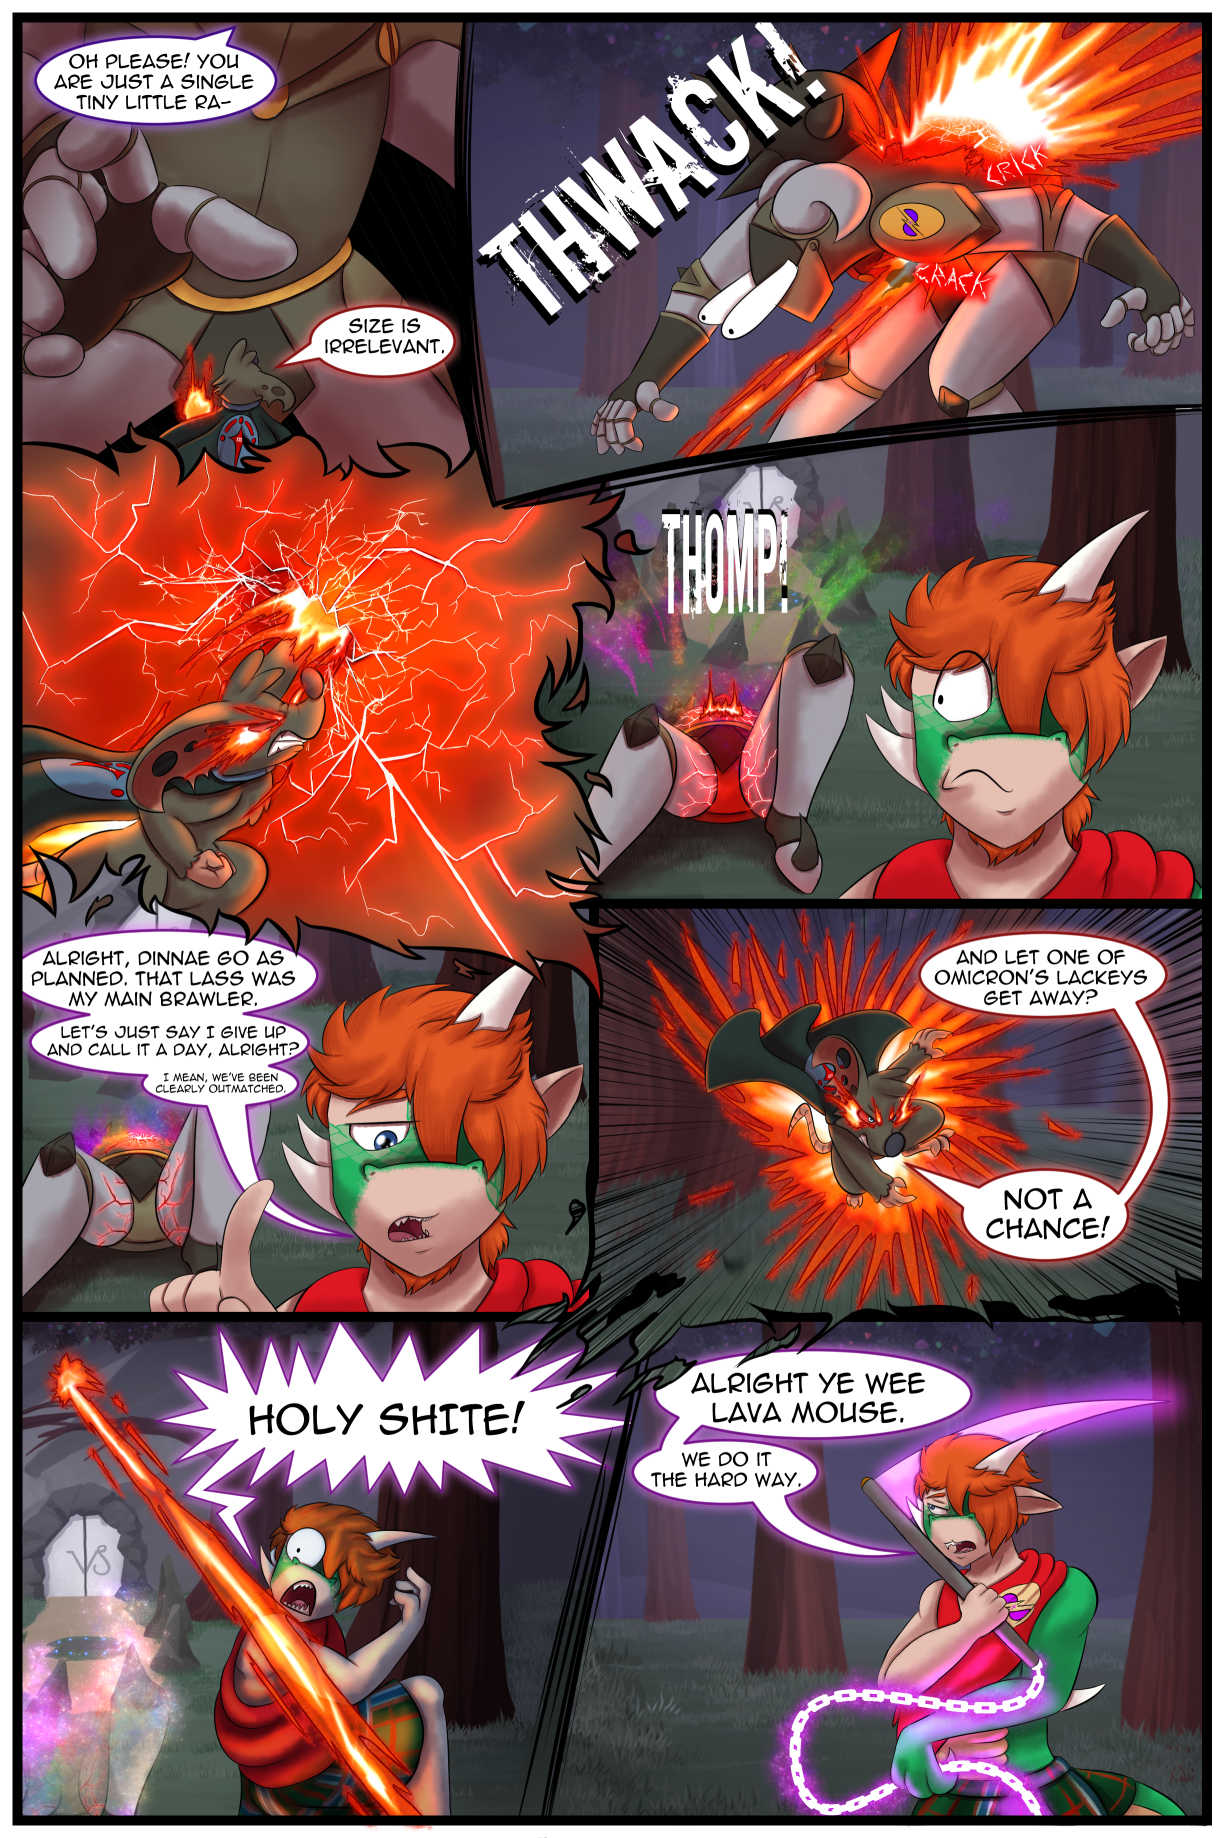 Ch5 Page 15 – Size Does Not Matter